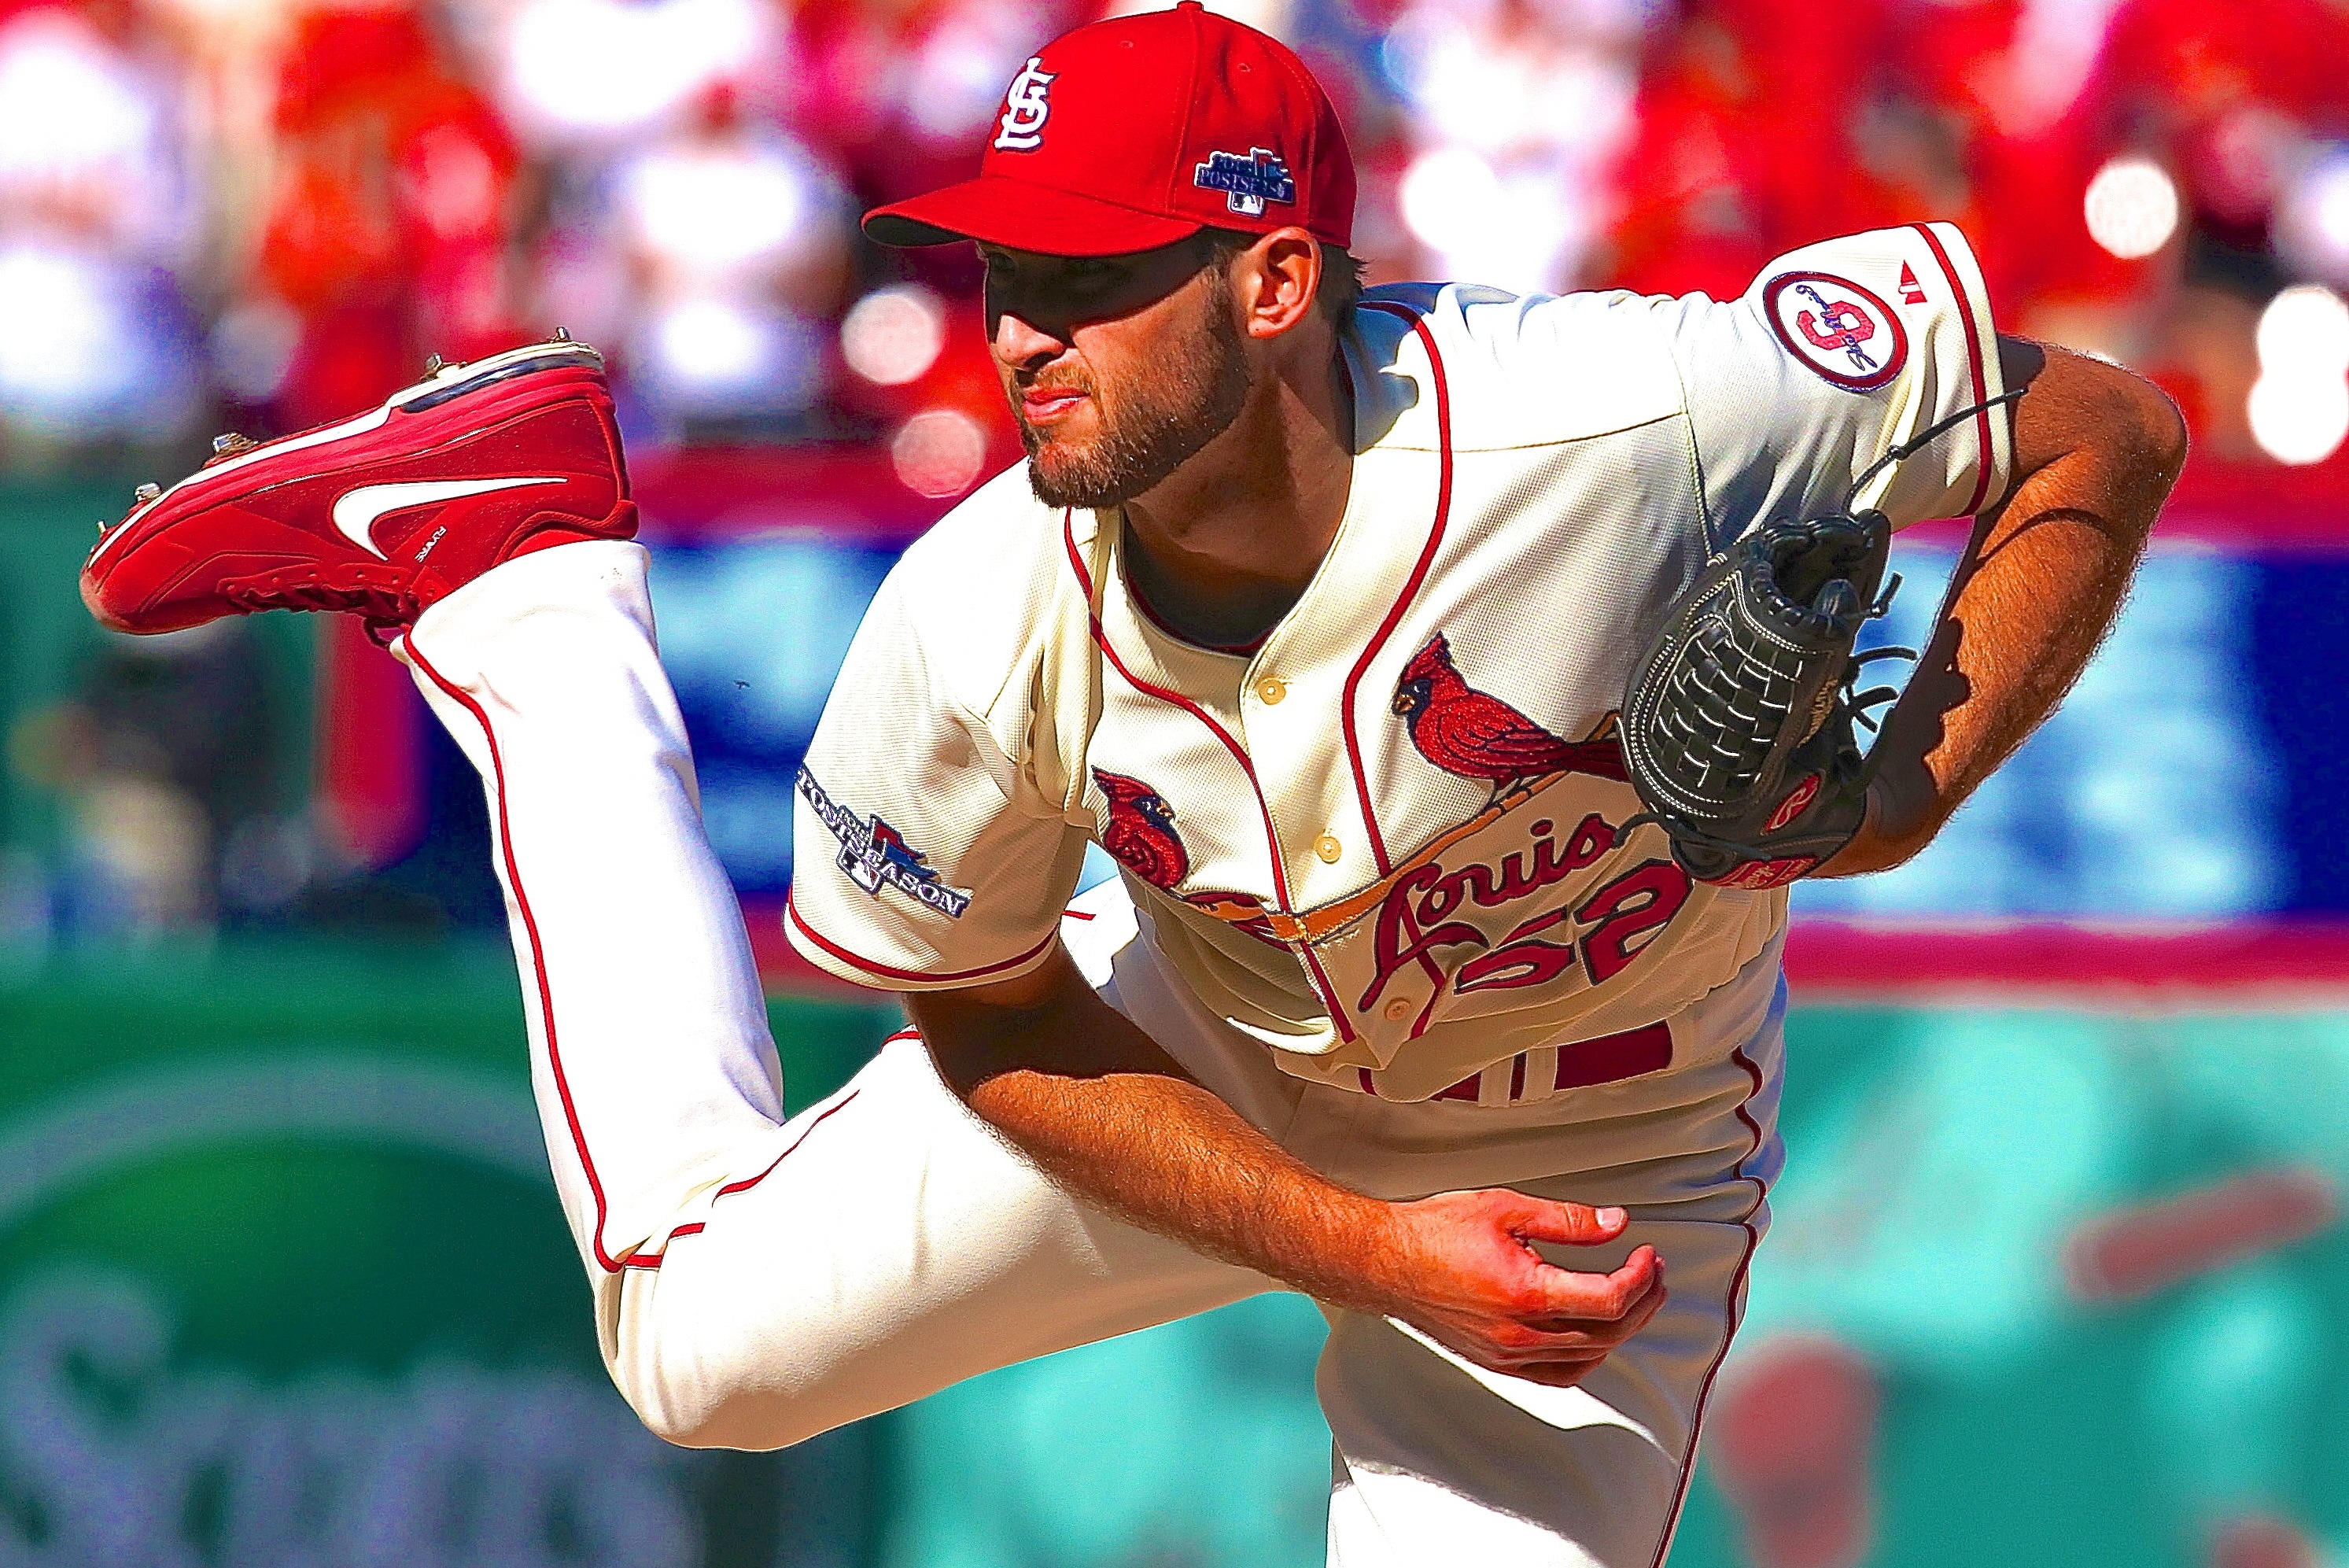 Dodgers vs. Cardinals: Score, Grades and Analysis for NLCS Game 2 | Bleacher Report